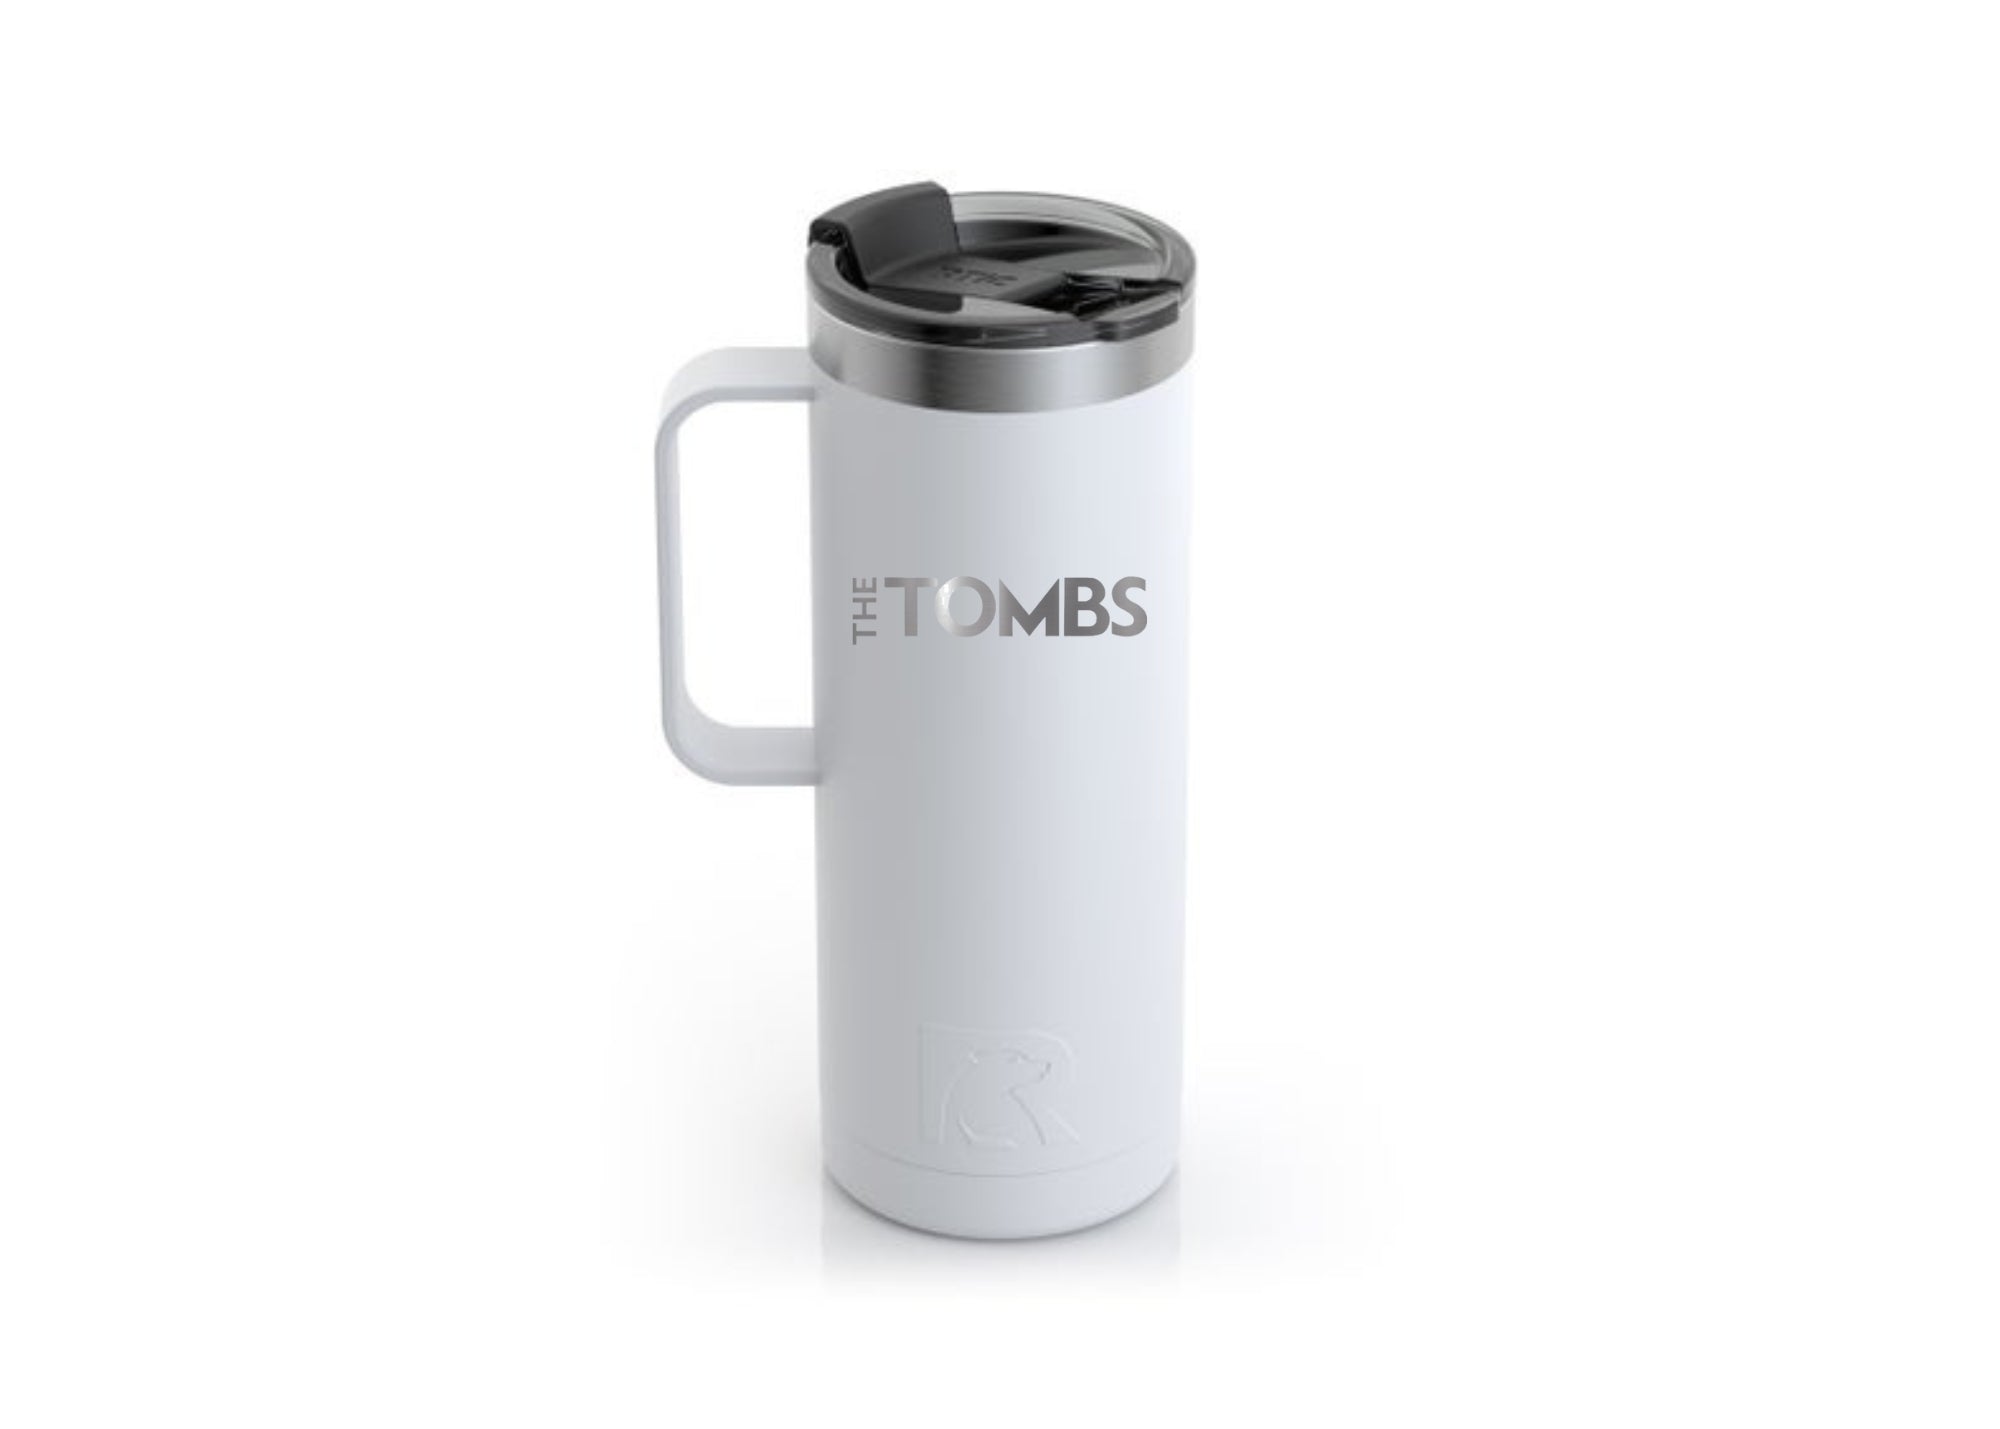 RTIC Travel Coffee Cup Engraved